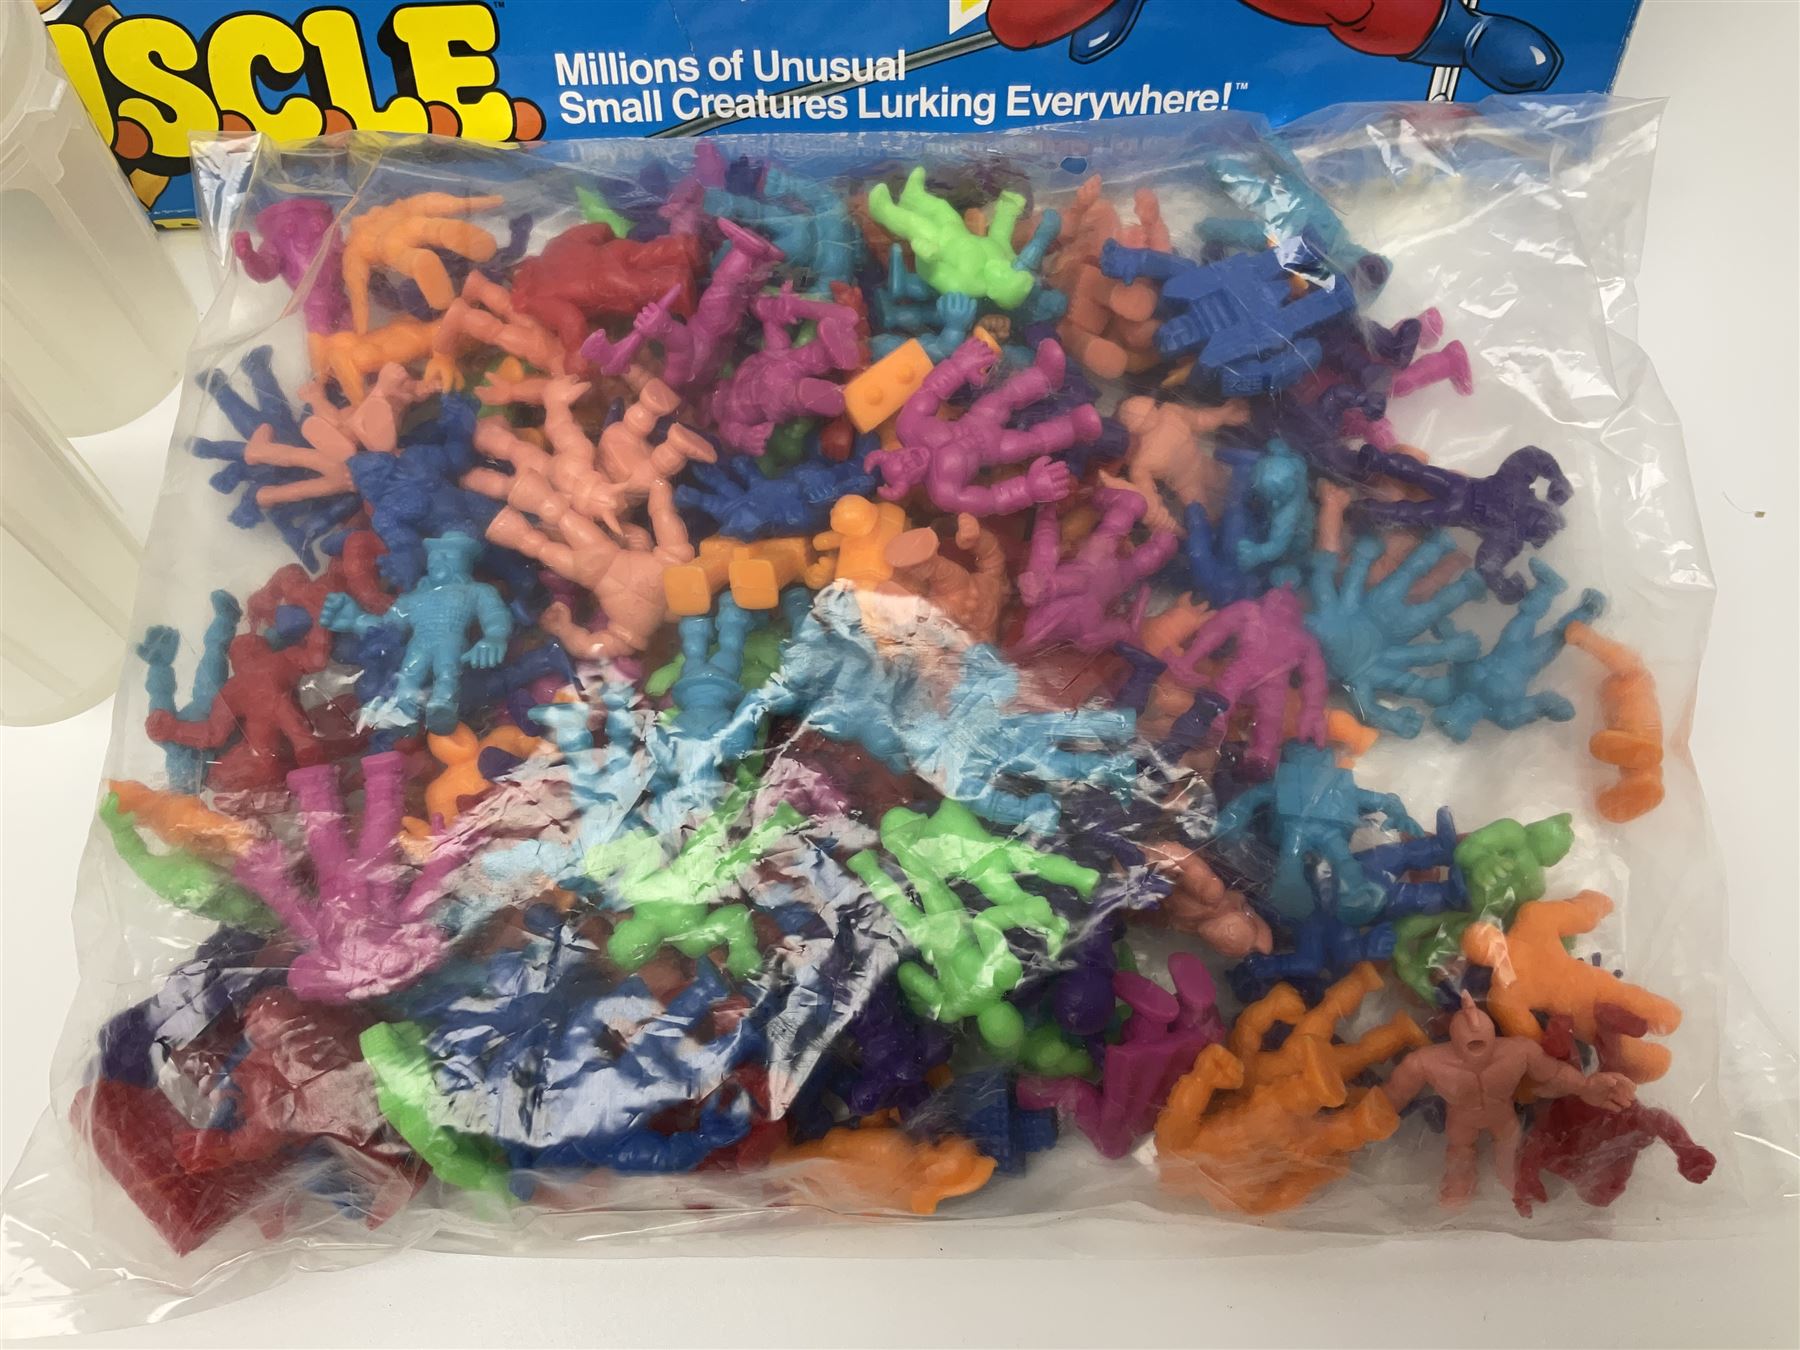 1980s Mattel M.U.S.C.L.E. creatures - one hundred and sixty loose figures and #4 Cosmic Showdown Set - Image 2 of 7